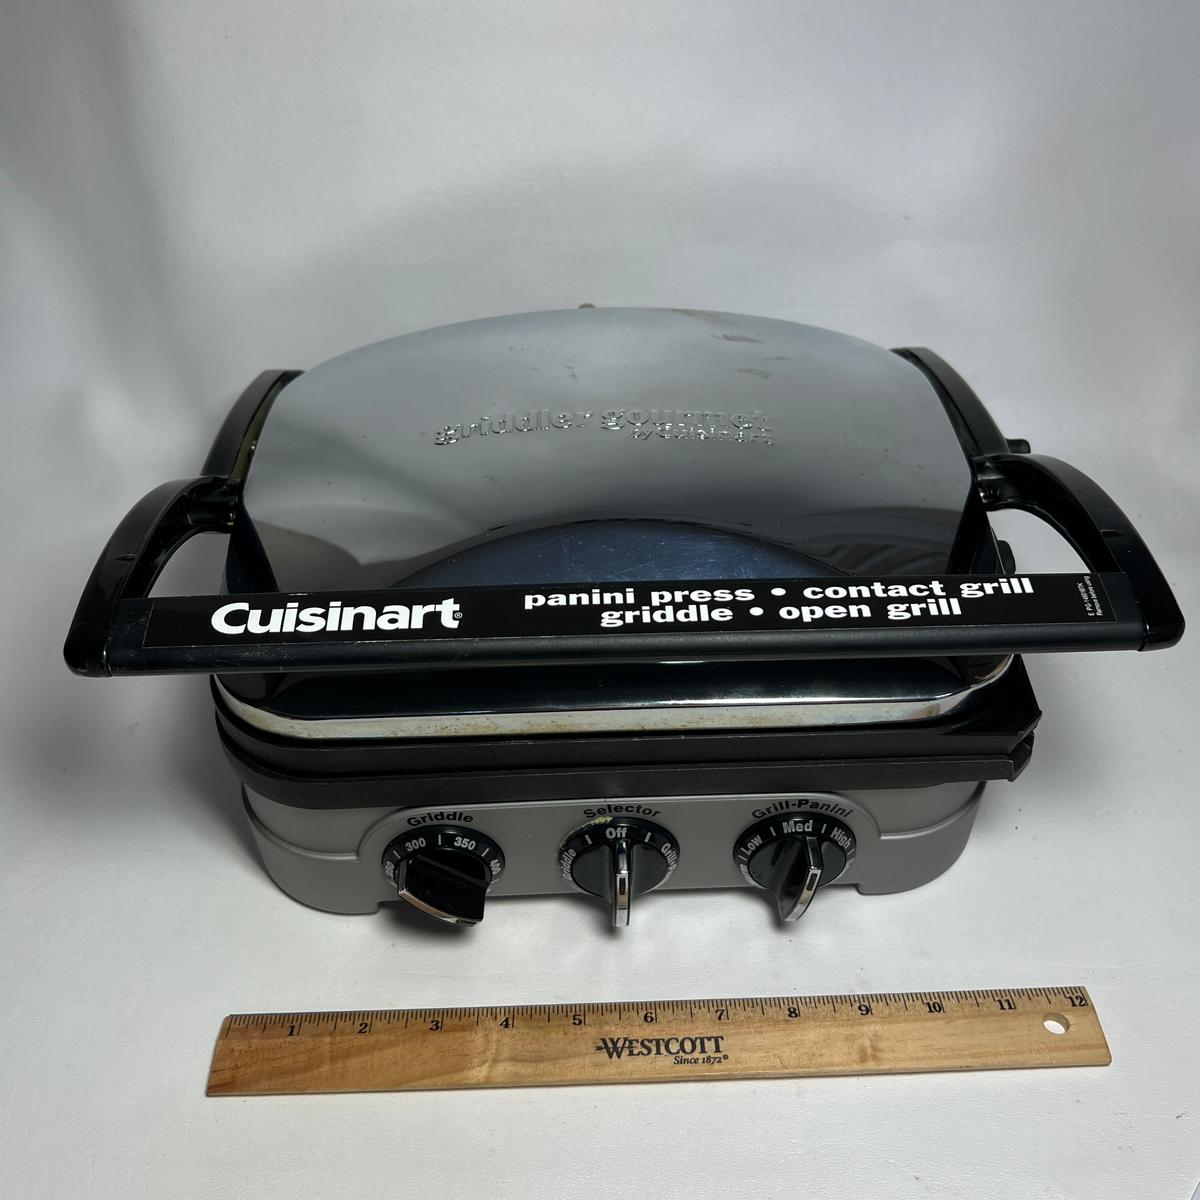 Cuisinart Panini Press - Contact Grill - Griddle- Open Grill - Model GRID-8PC